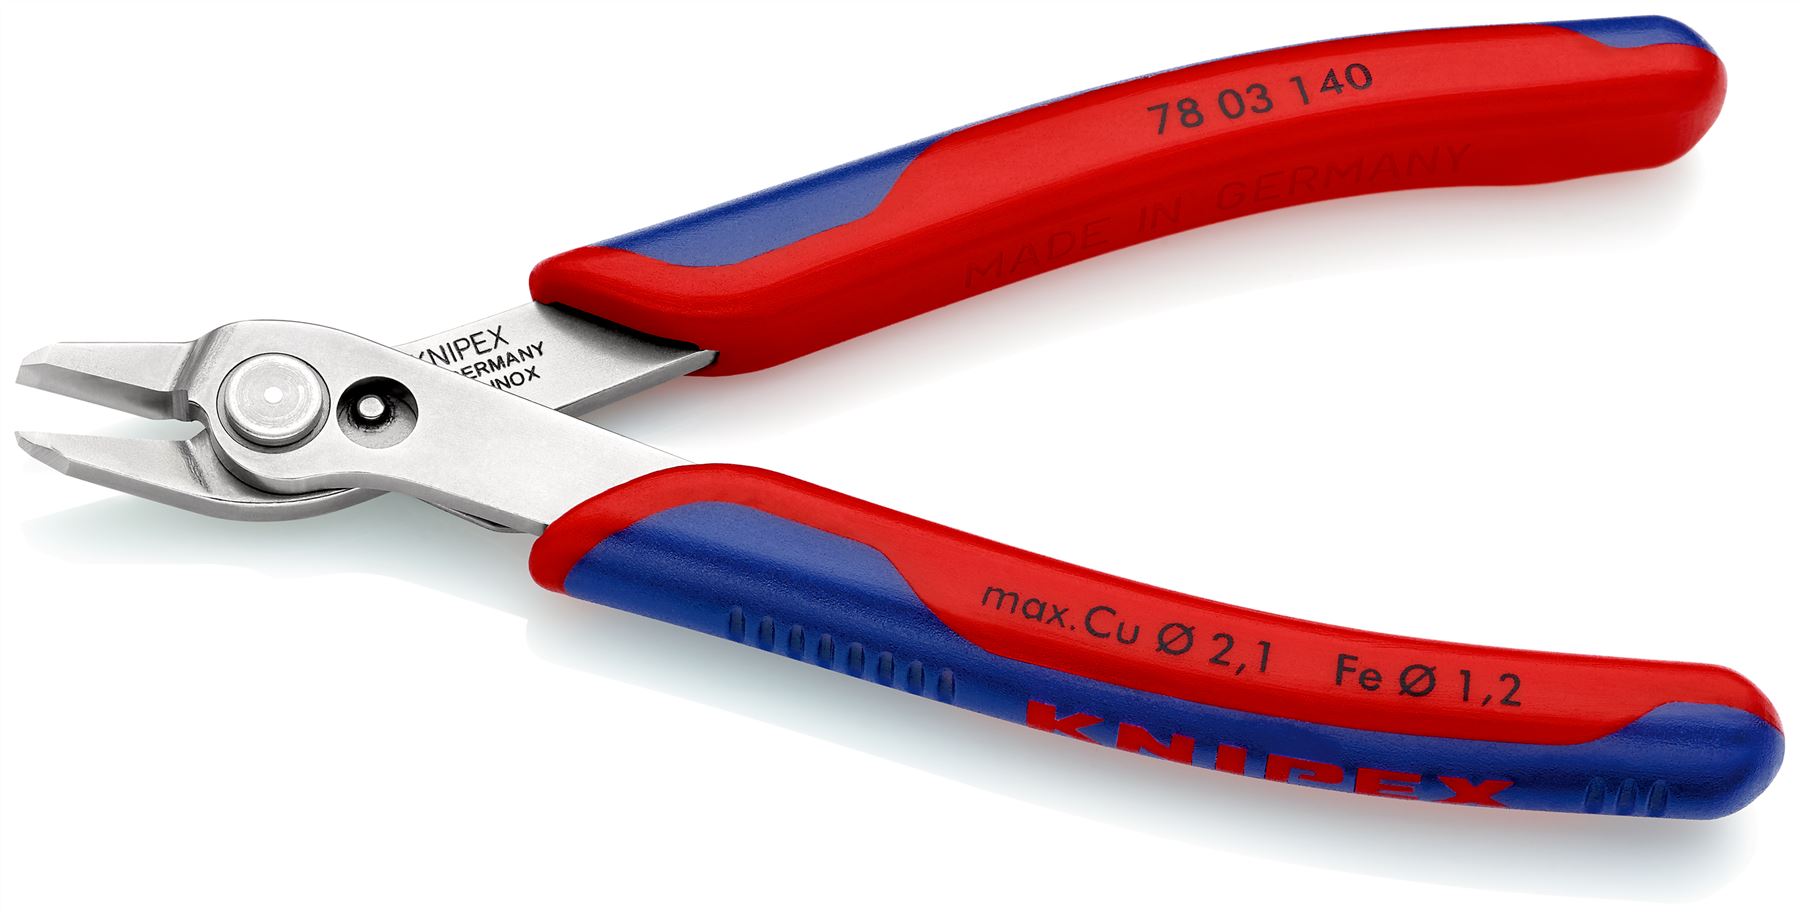 KNIPEX Electronics Super Knips XL Precision Cutting Pliers 140mm Multi Component Grips 78 03 140 SB